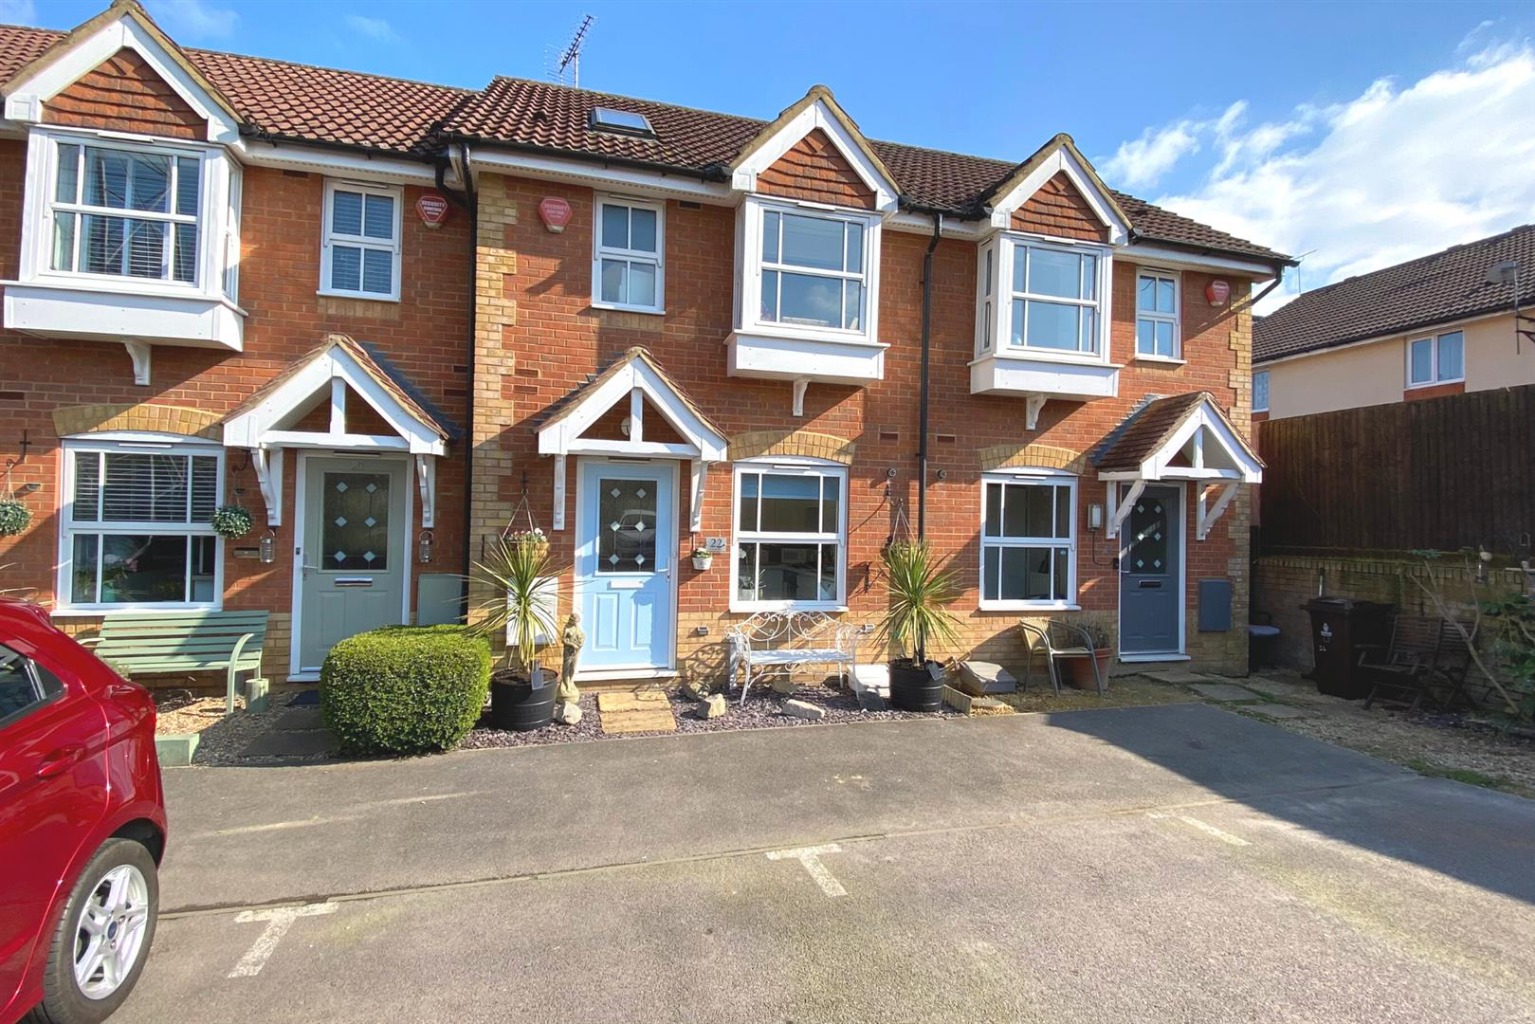 ** Check out our property video ** Contact Dan ** Welcome to Howell close, a superb three-bedroom home in amazing condition. New kitchen, downstairs cloakroom, and a bright conservatory, we can't wait to show you more, come and have a look....